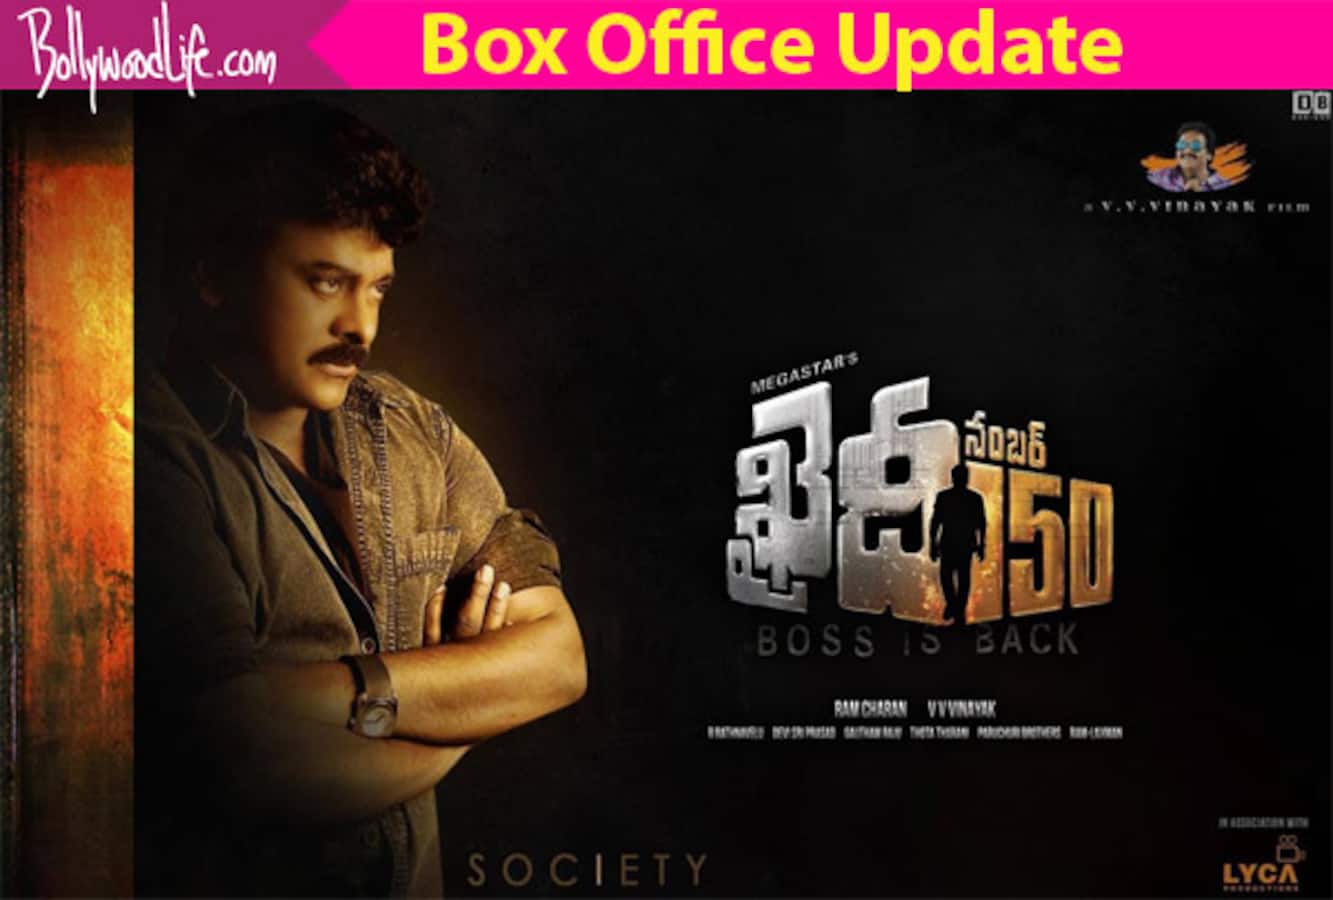 Khaidi No.150 box office collection day 5: Chiranjeevi's comeback film hits the bullseye, crosses the Rs 100 crore mark in 5 days